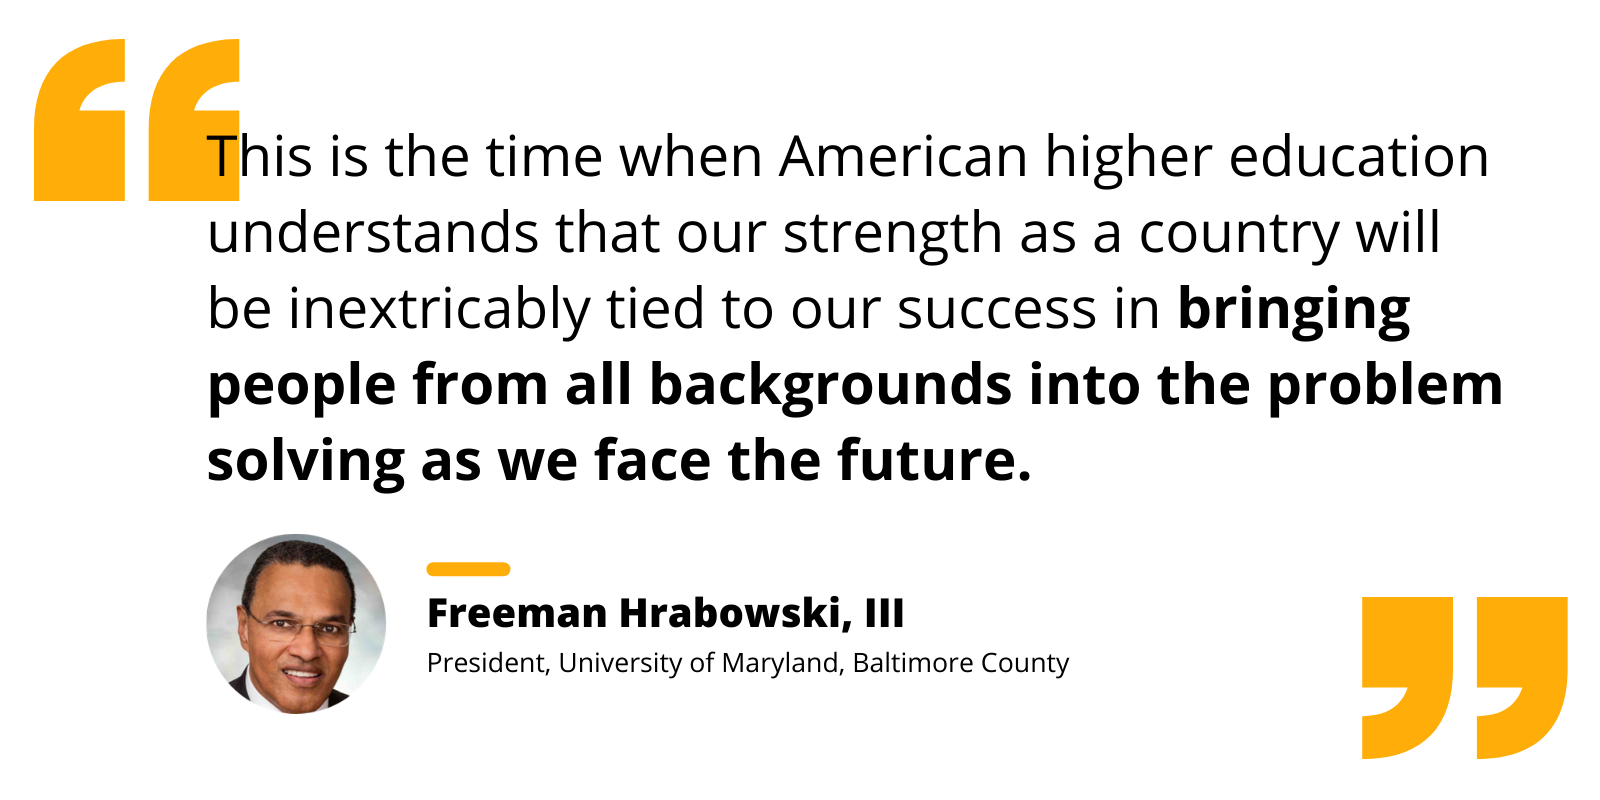 Quote by Freeman Hrabowski re: U.S. higher ed’s role in bringing people from all backgrounds into the problem solving process.